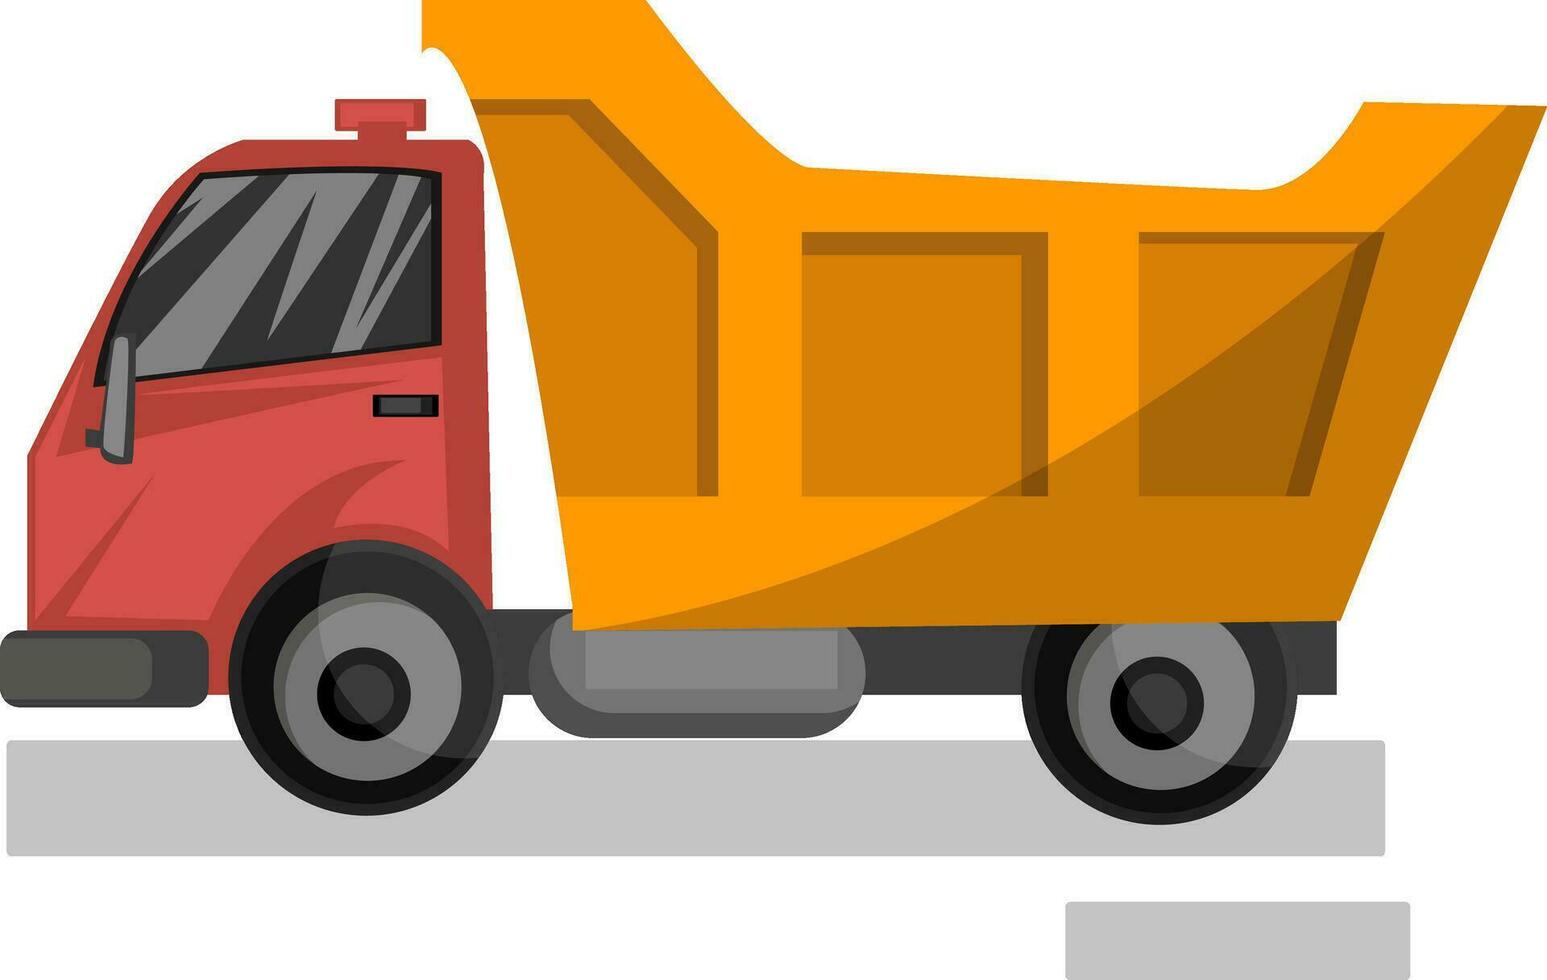 Vector illustration cartoon style of red and yellow dump truck on white background.